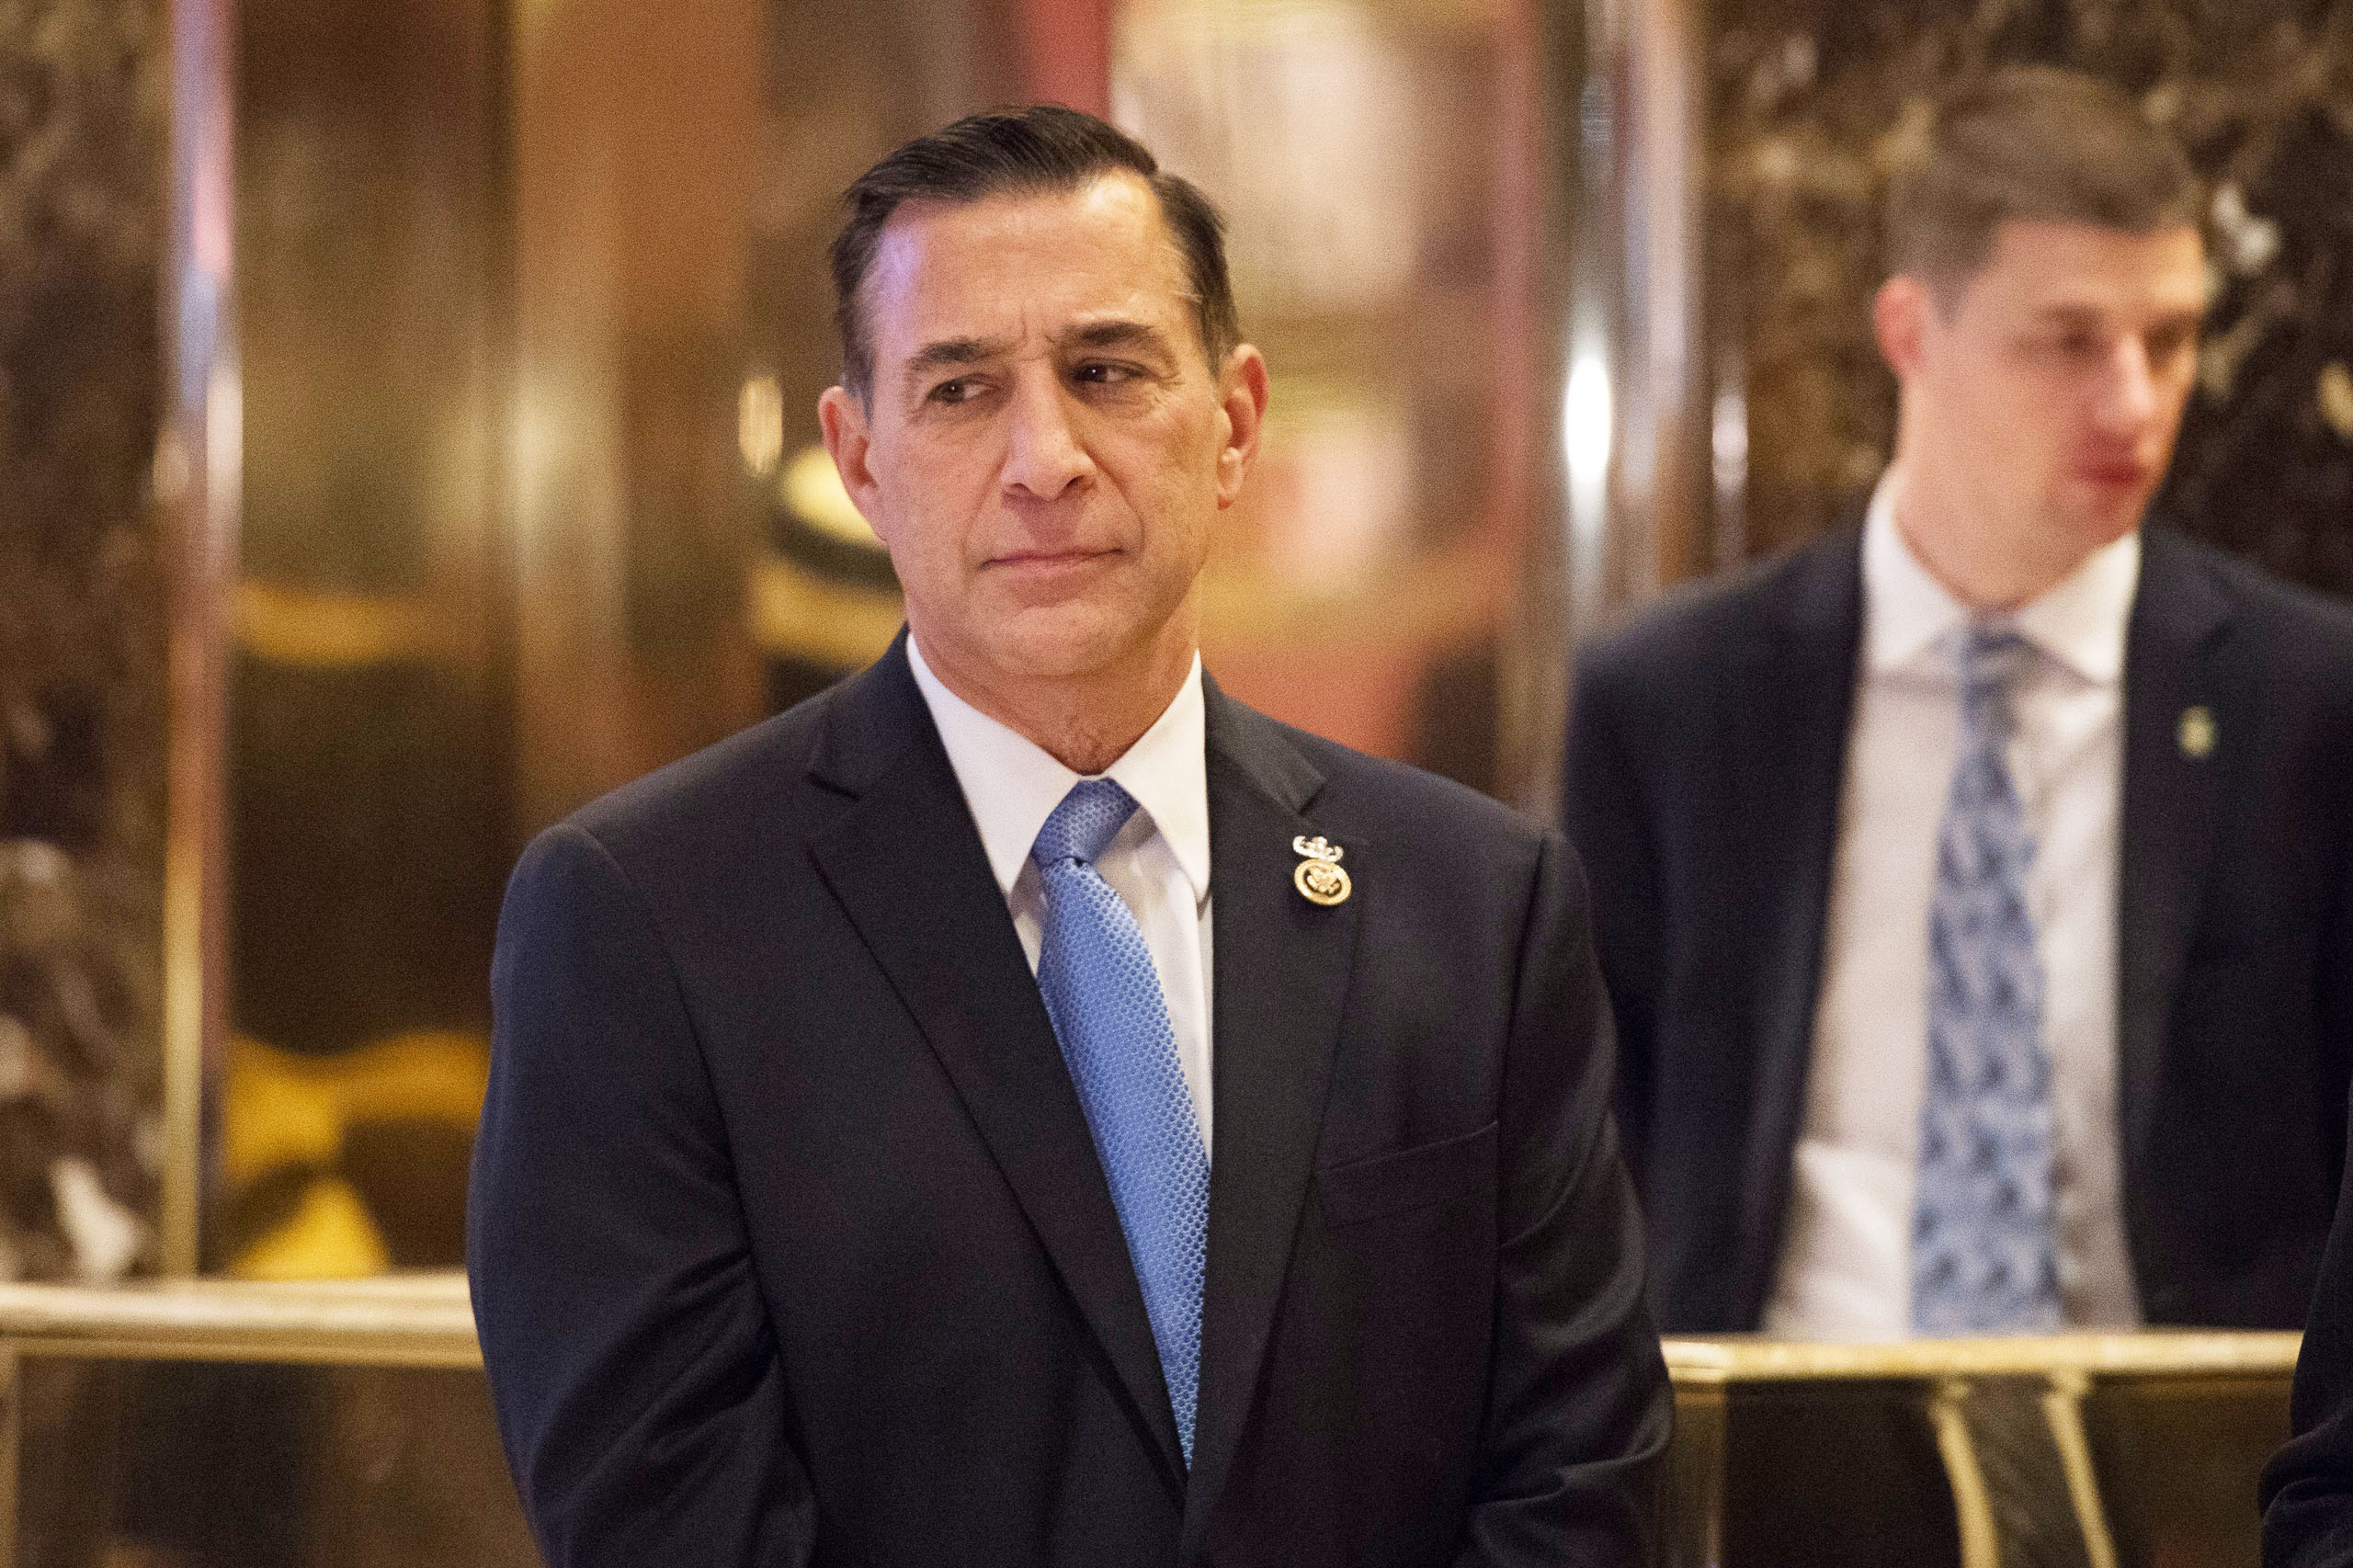 US Representative Darrell Issa arrives for a meeting with Donald Trump at Trump Tower, on Dec. 14, 2016 (Bryan R. Smith—AFP/Getty Images)